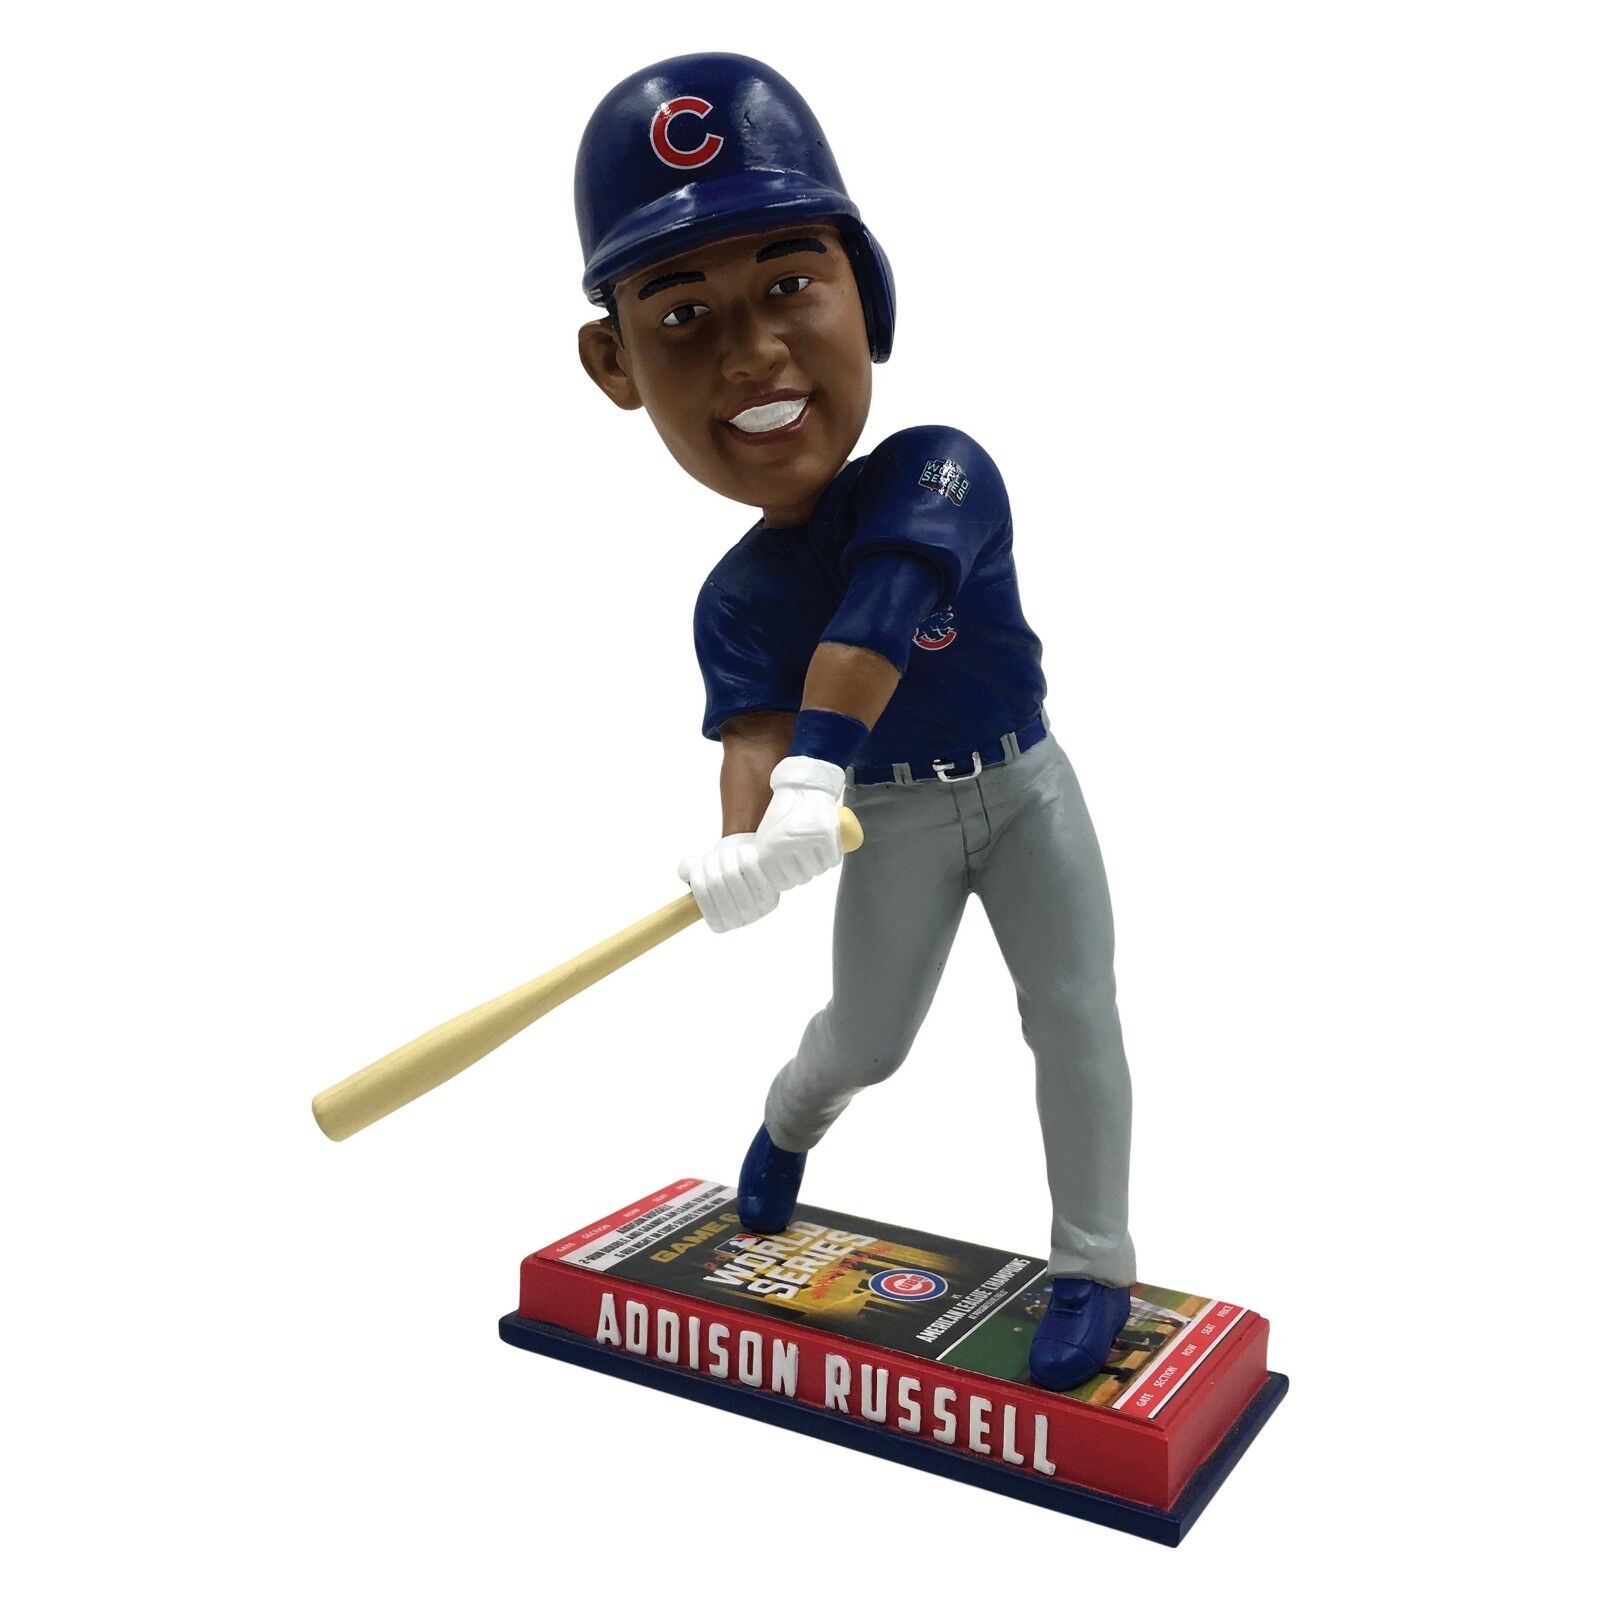 Addison Russell 2016 World Series Ticket Base Special Edition Bobblehead